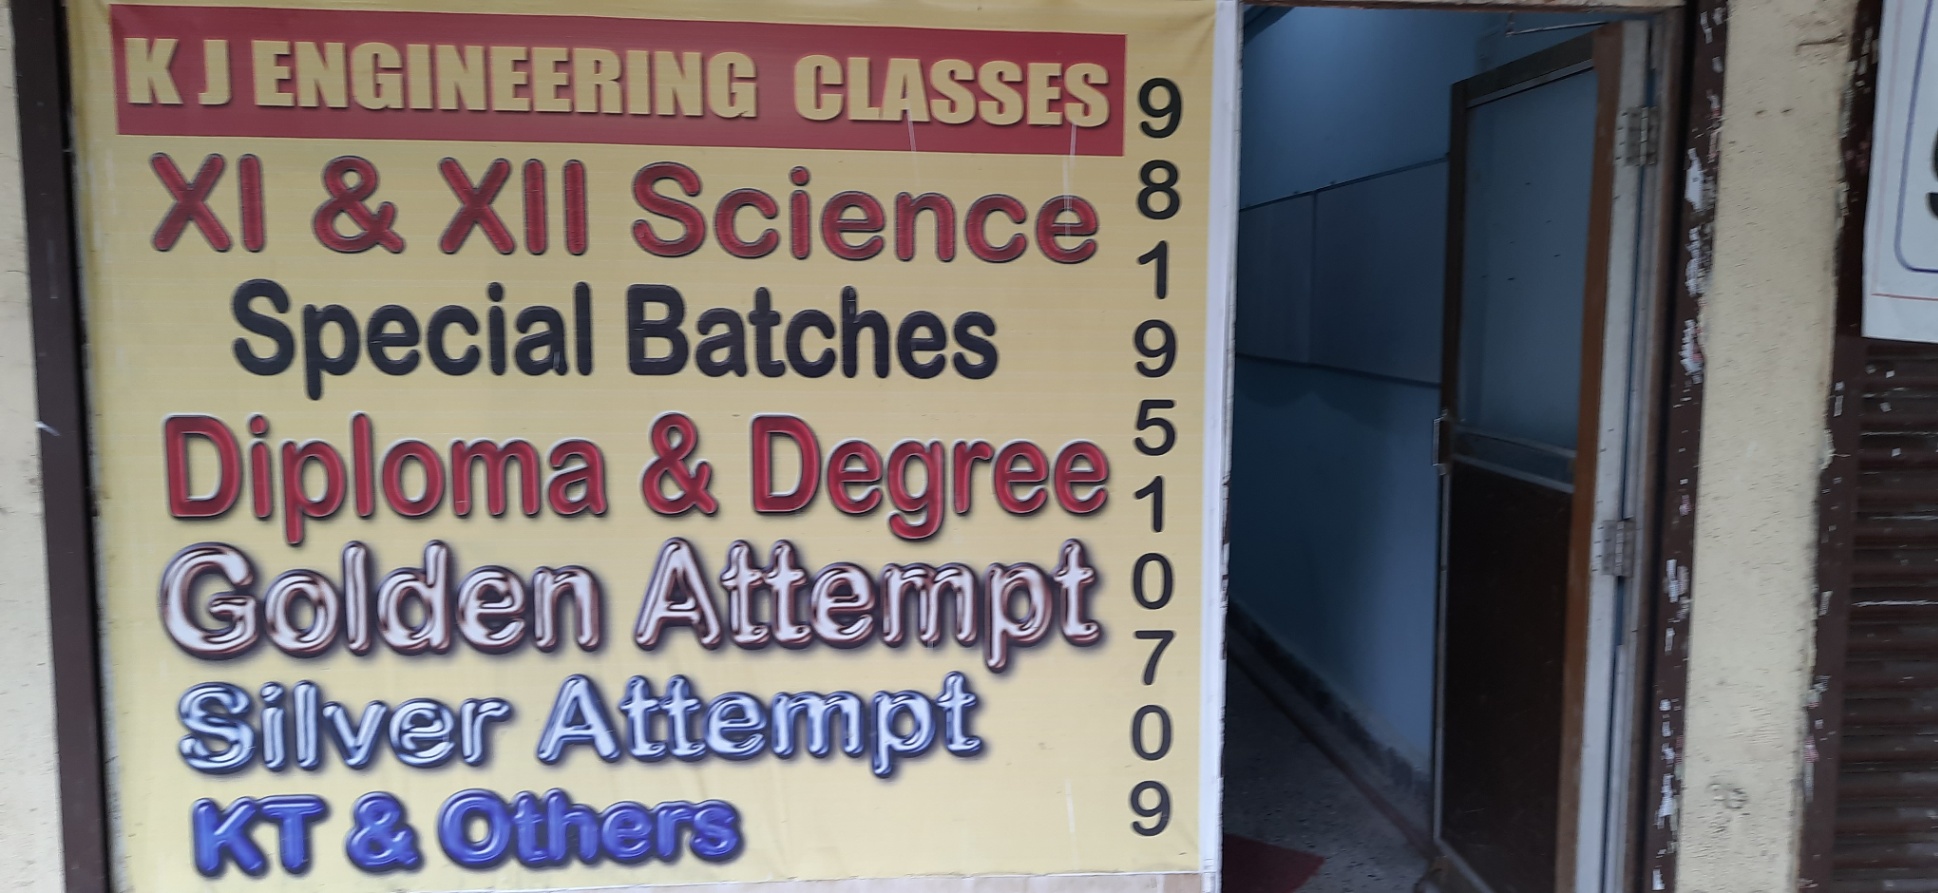 22 years experience  in PCM  Mathematics  Engineering  Subjects such as  Mathematics  Mechanics Mechanical  and Civil Engineering  Subjects 